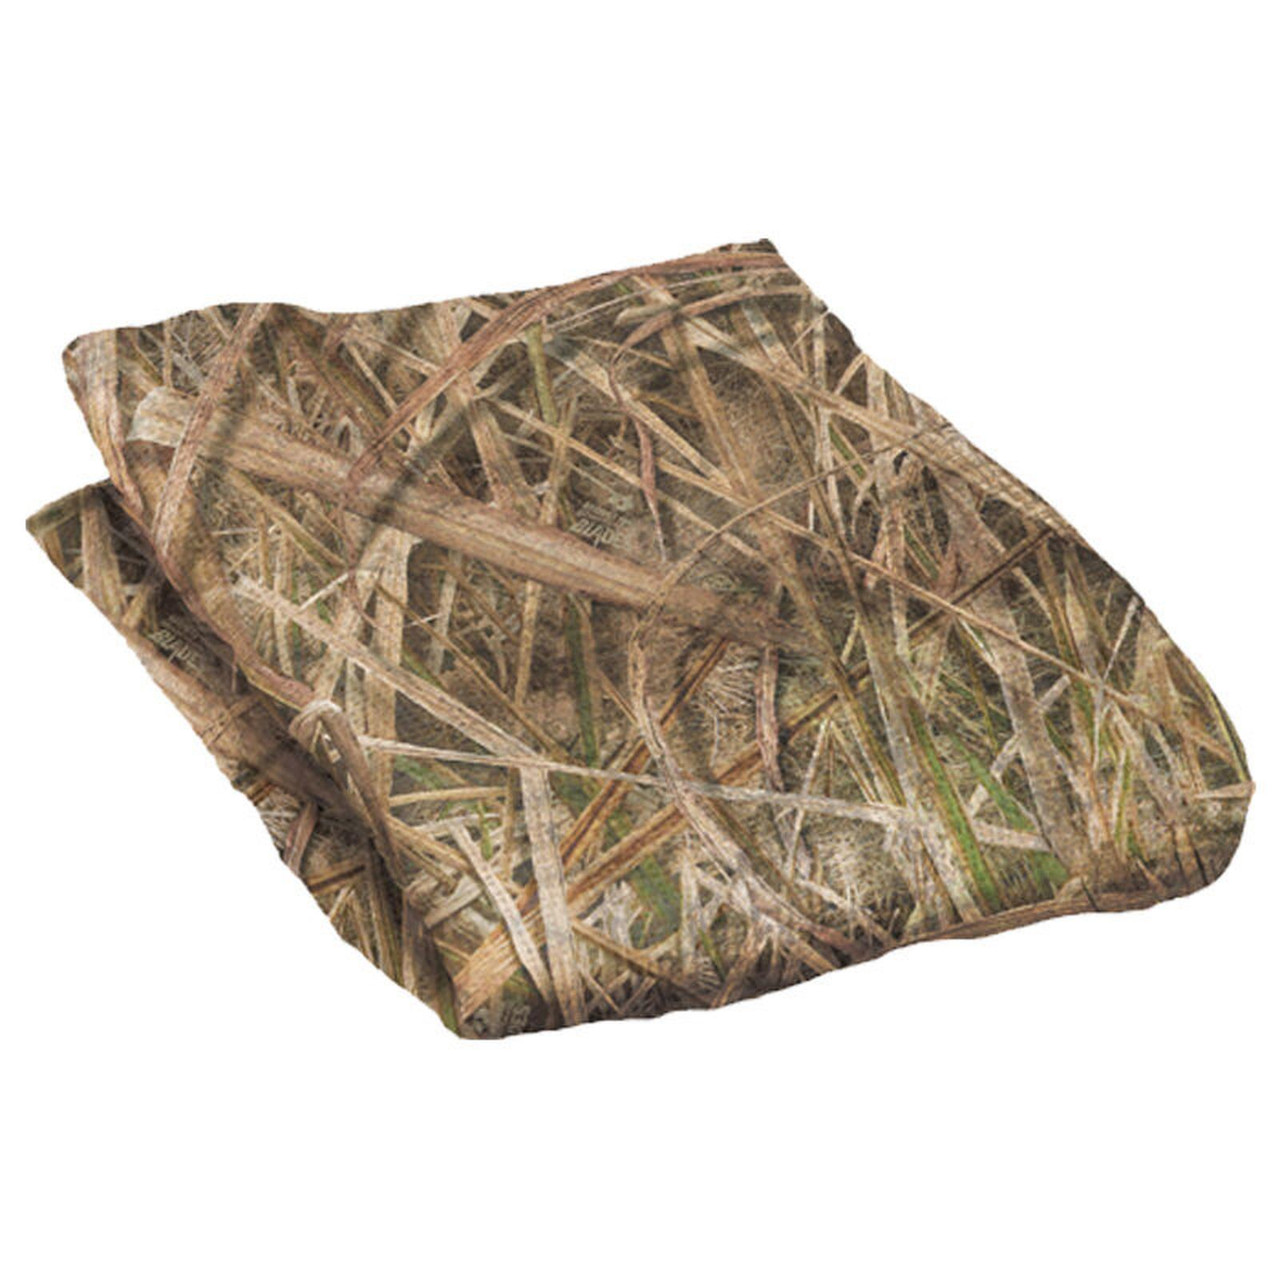 12 feet x 56 inches Realtree... Details about   Allen Company Camo Netting for Hunting Blinds 